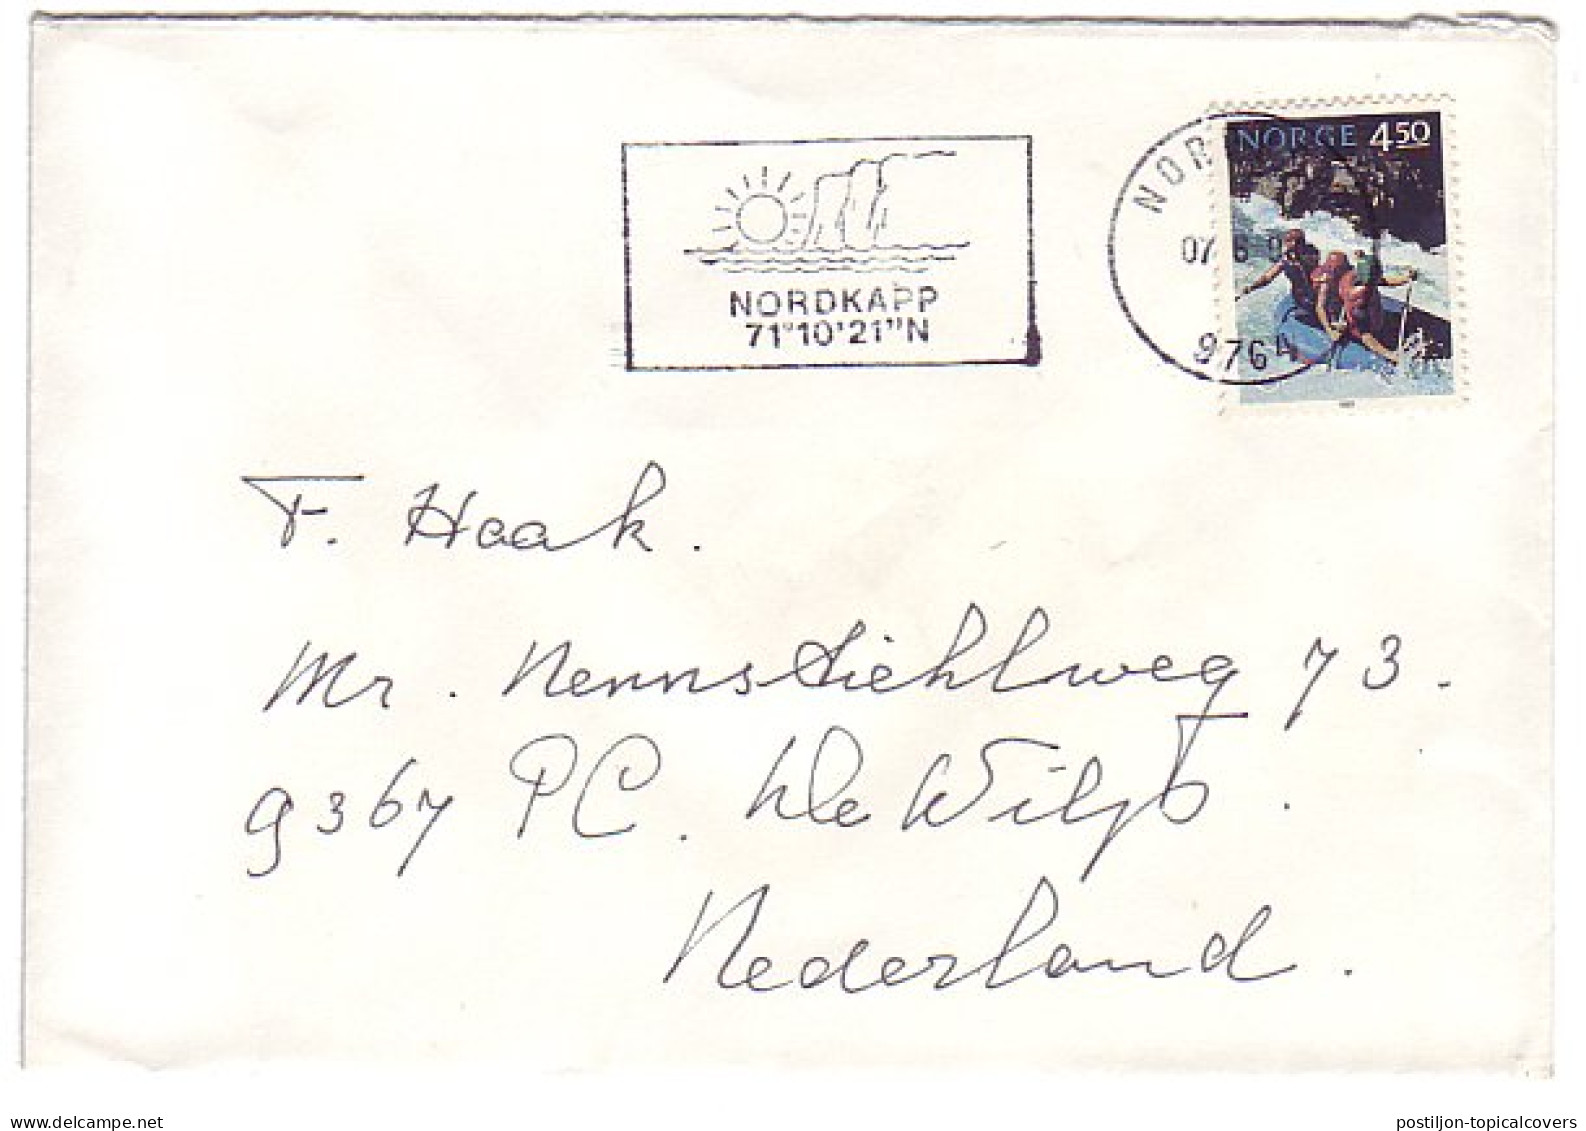 Cover / Postmark Norway 1993 North Cape - Sun - Iceberg - Arctic Expeditions